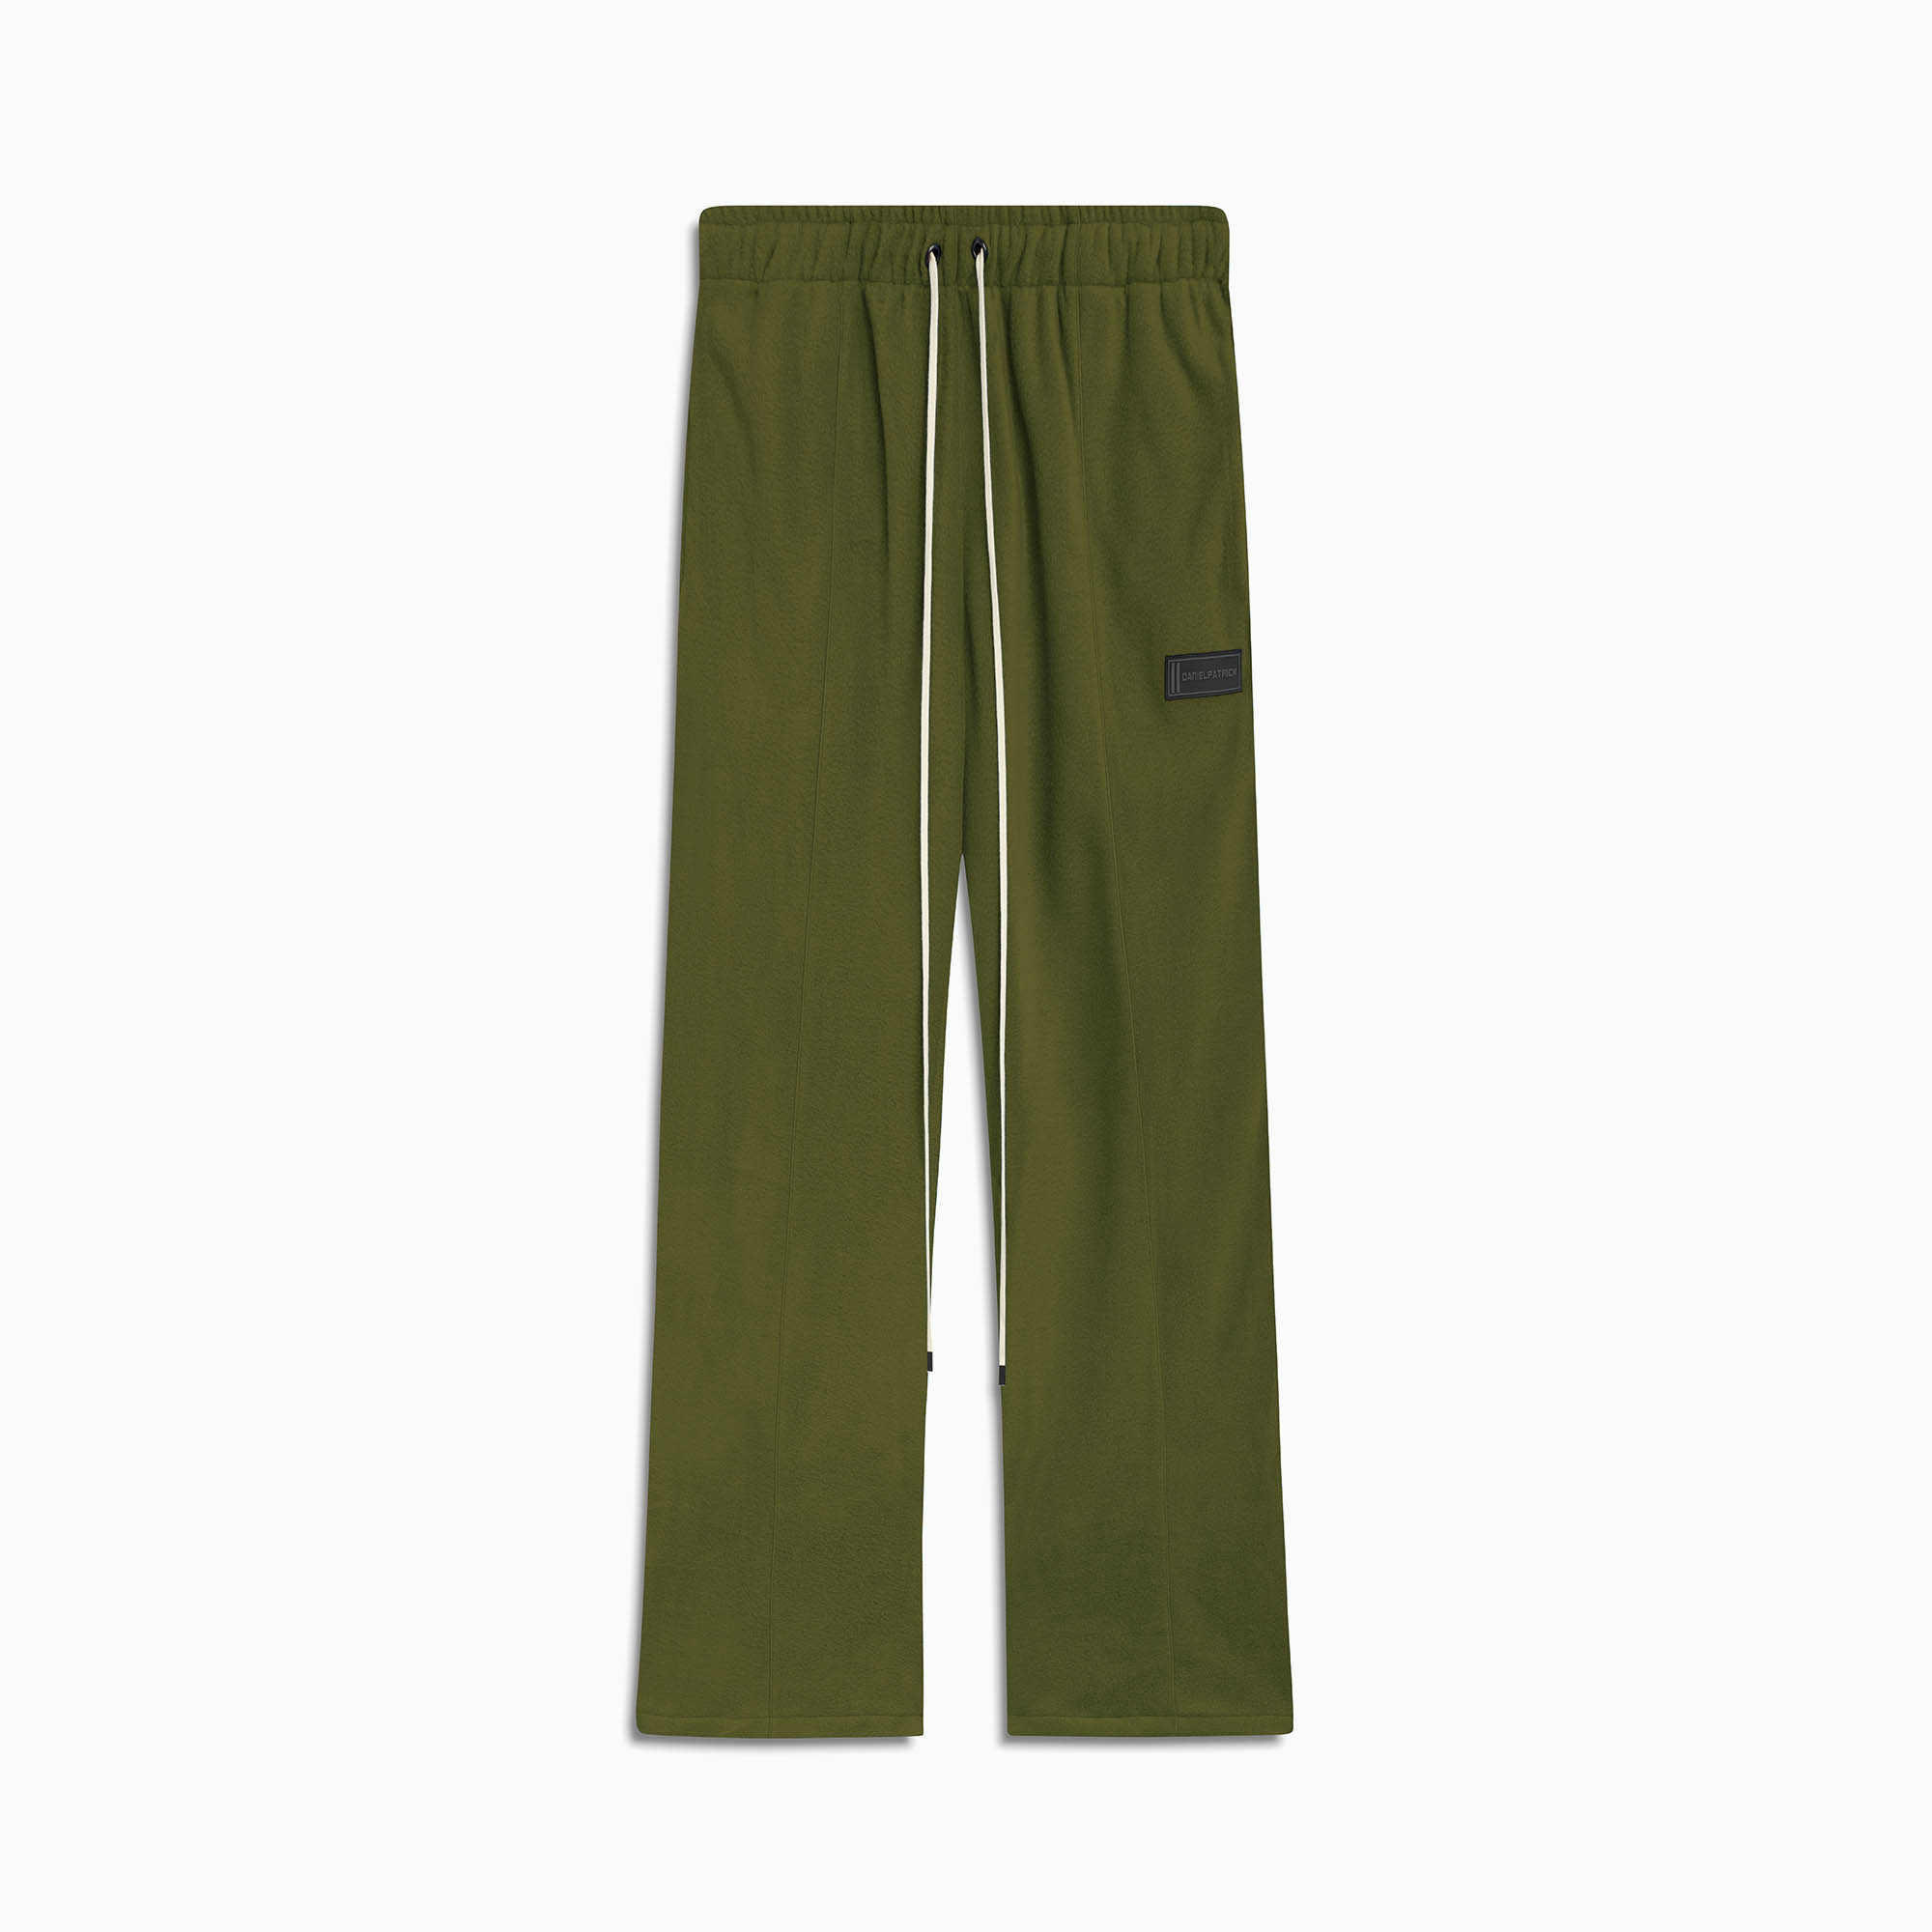 Bootcut Sweatpants in Olive Polar